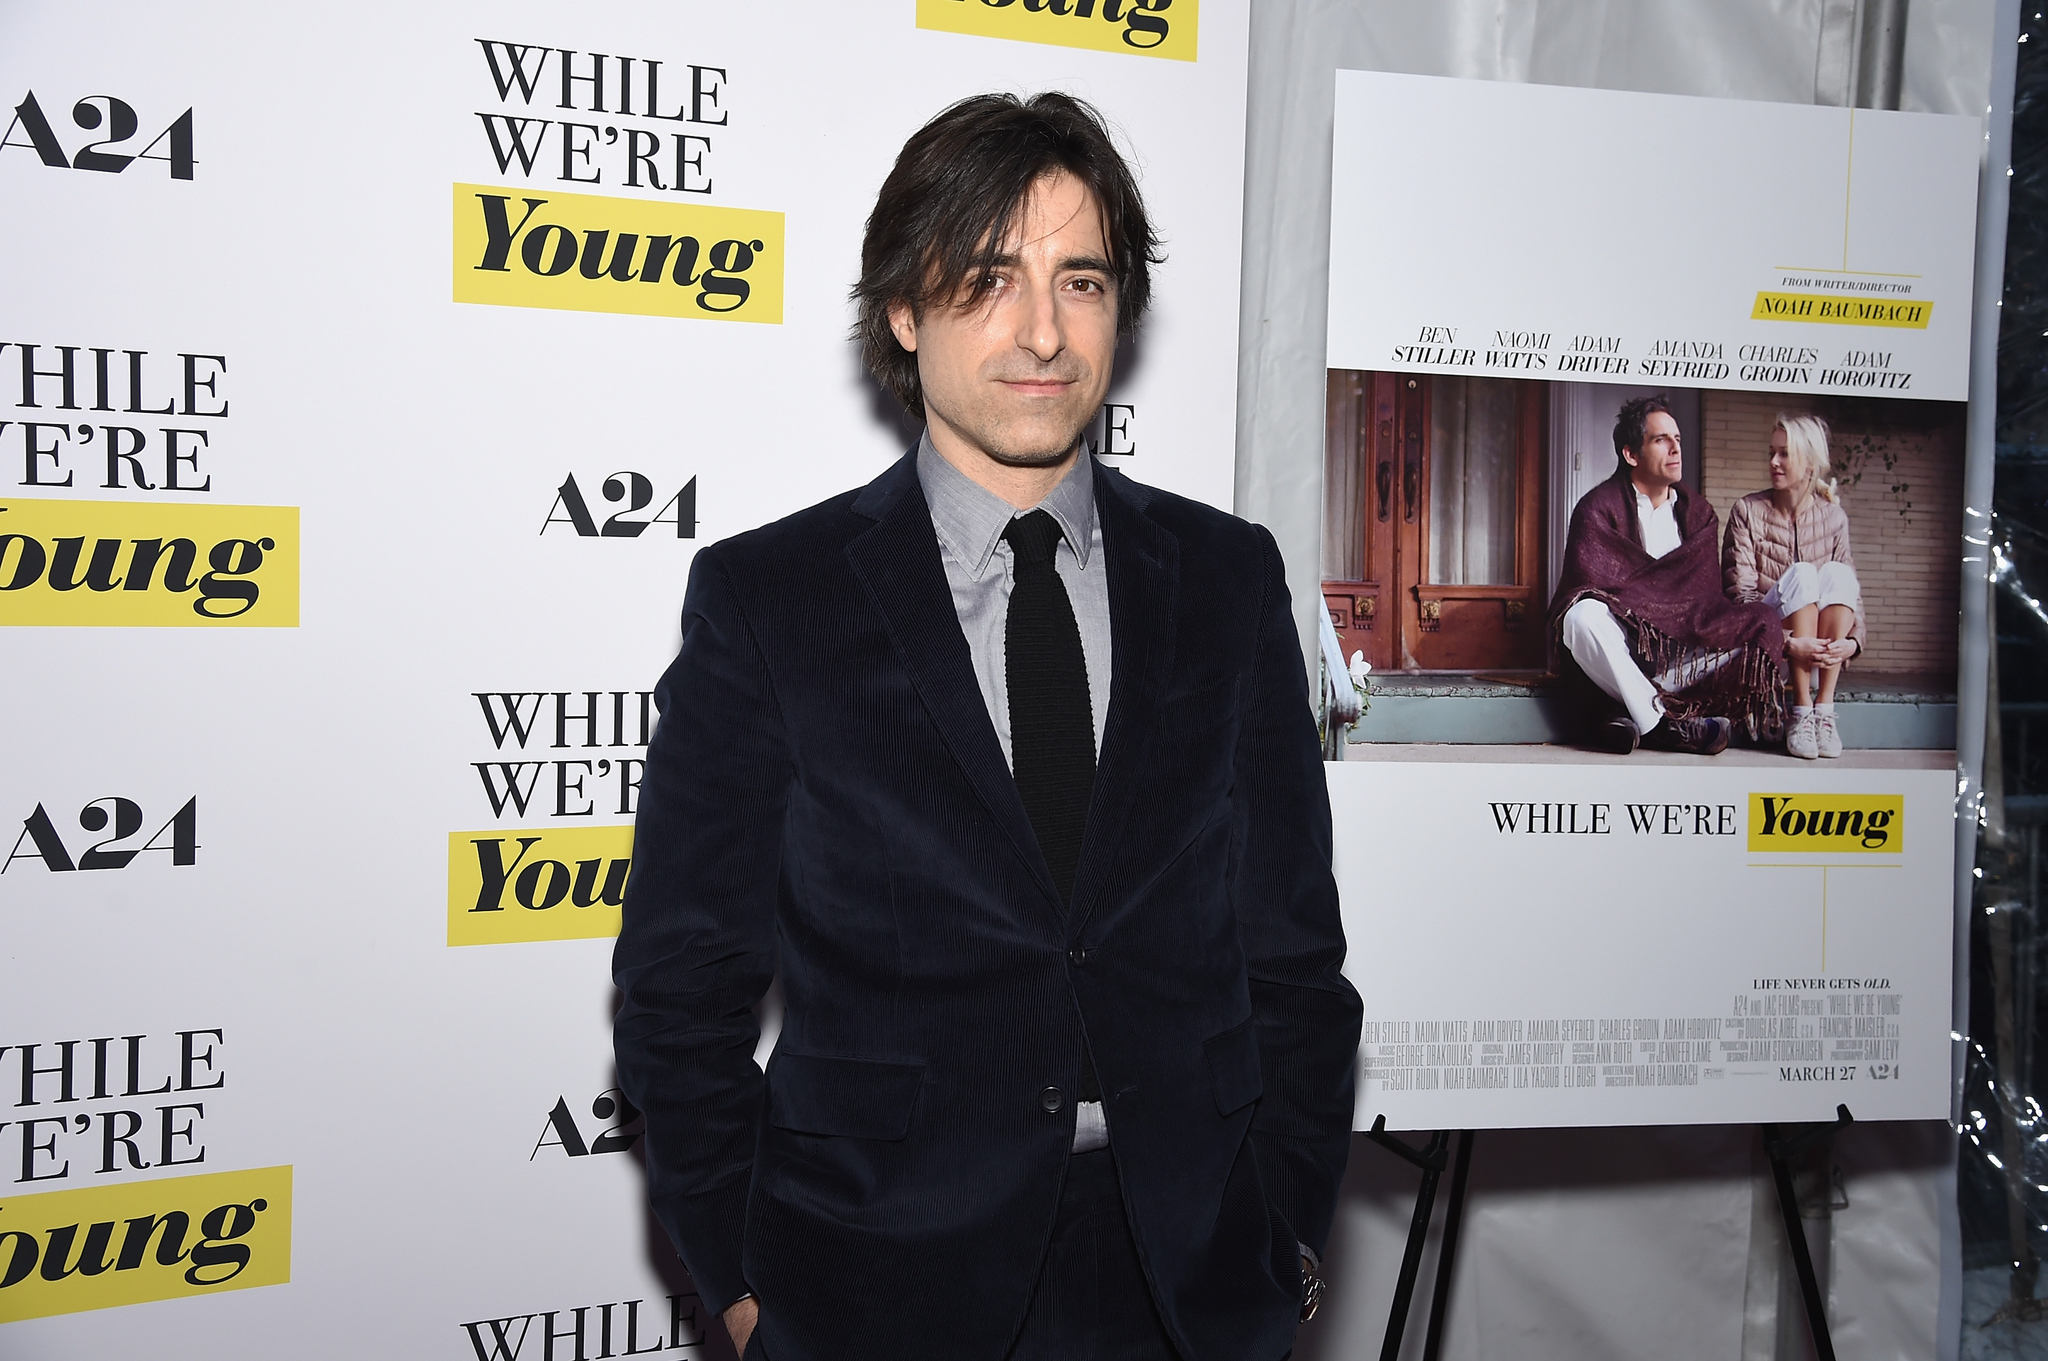 Noah Baumbach at event of While We're Young (2014)